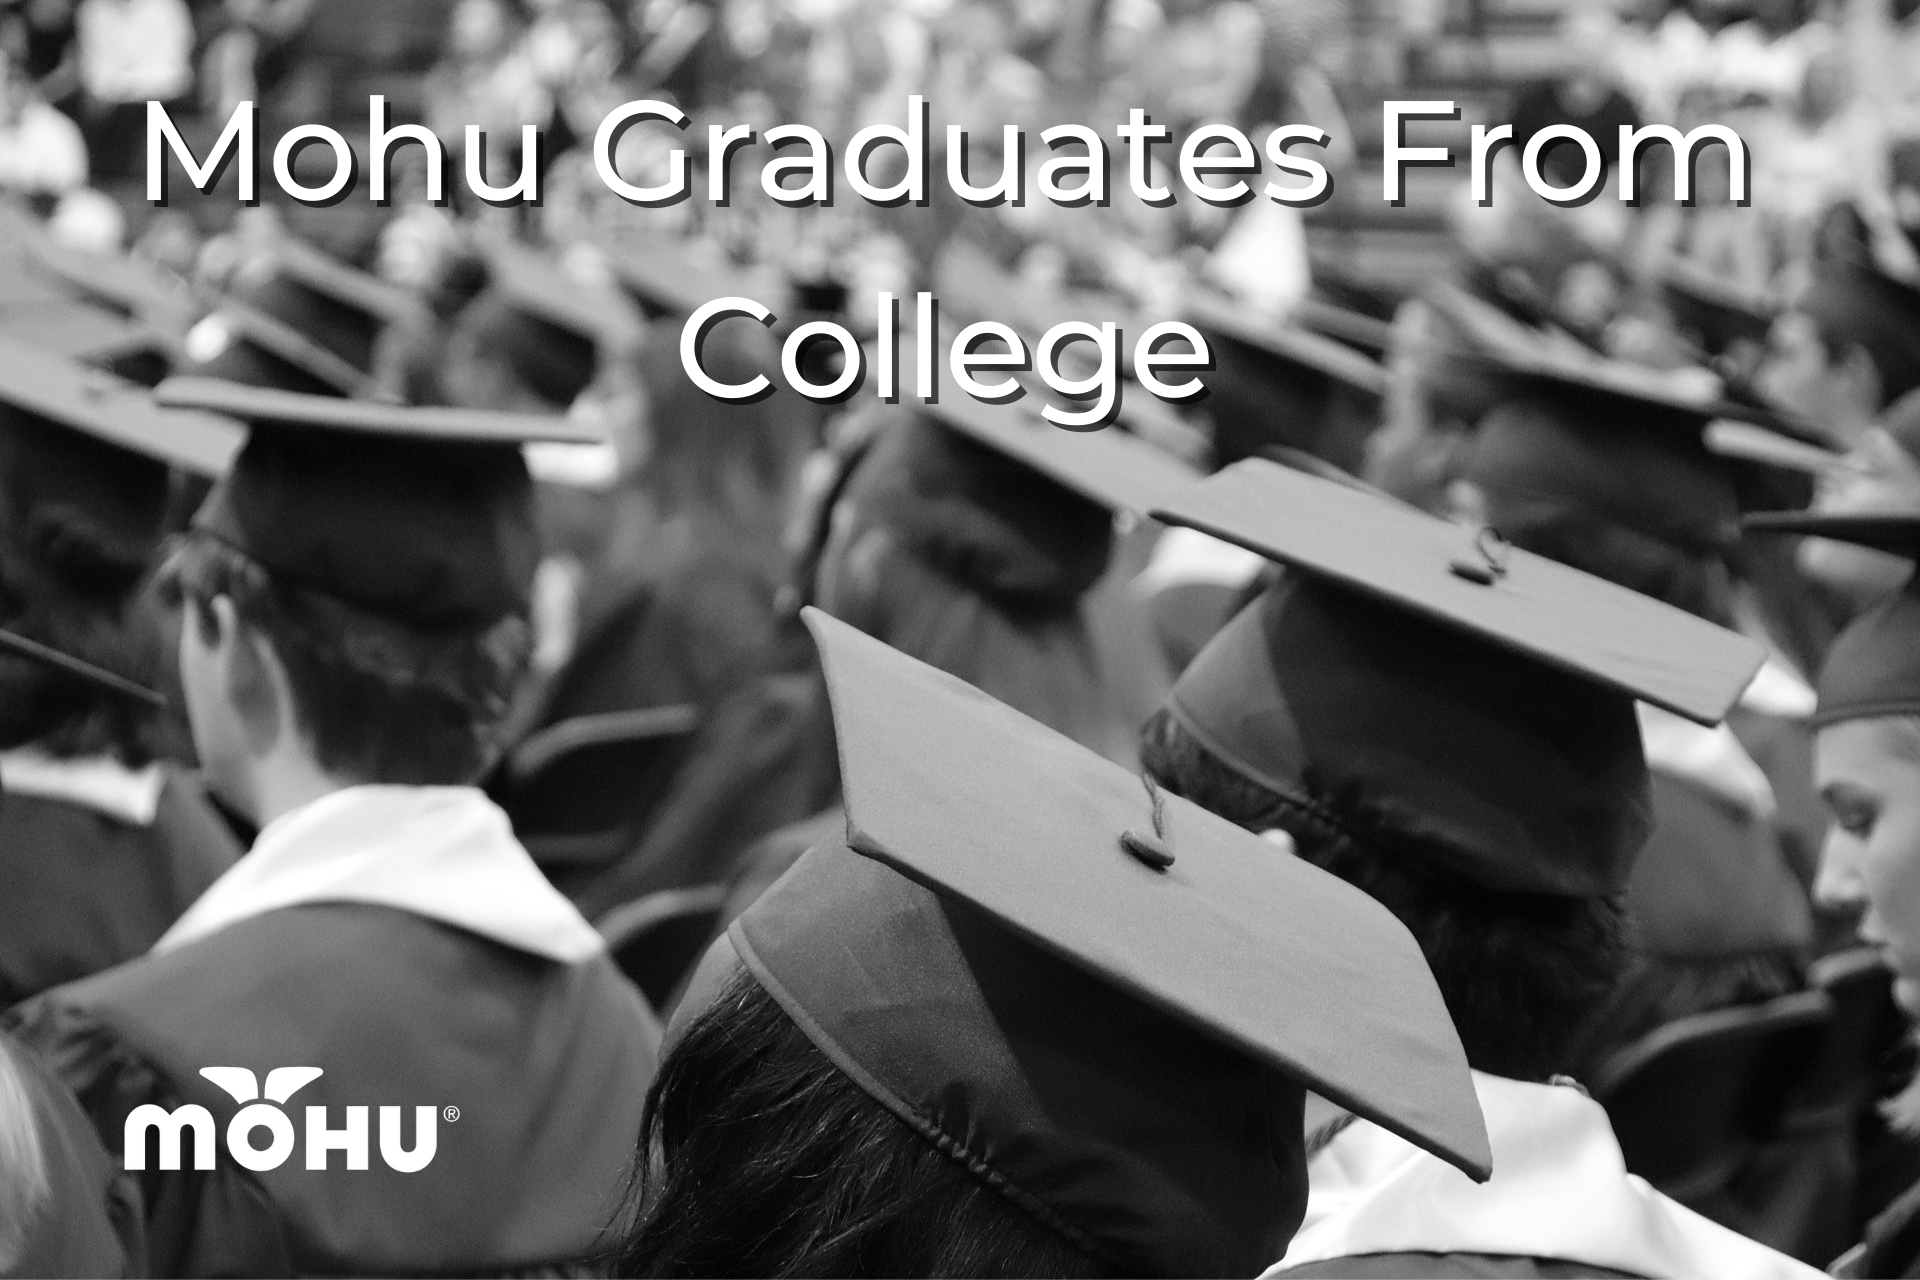 College grad hats Mohu Graduates From College, Mohu